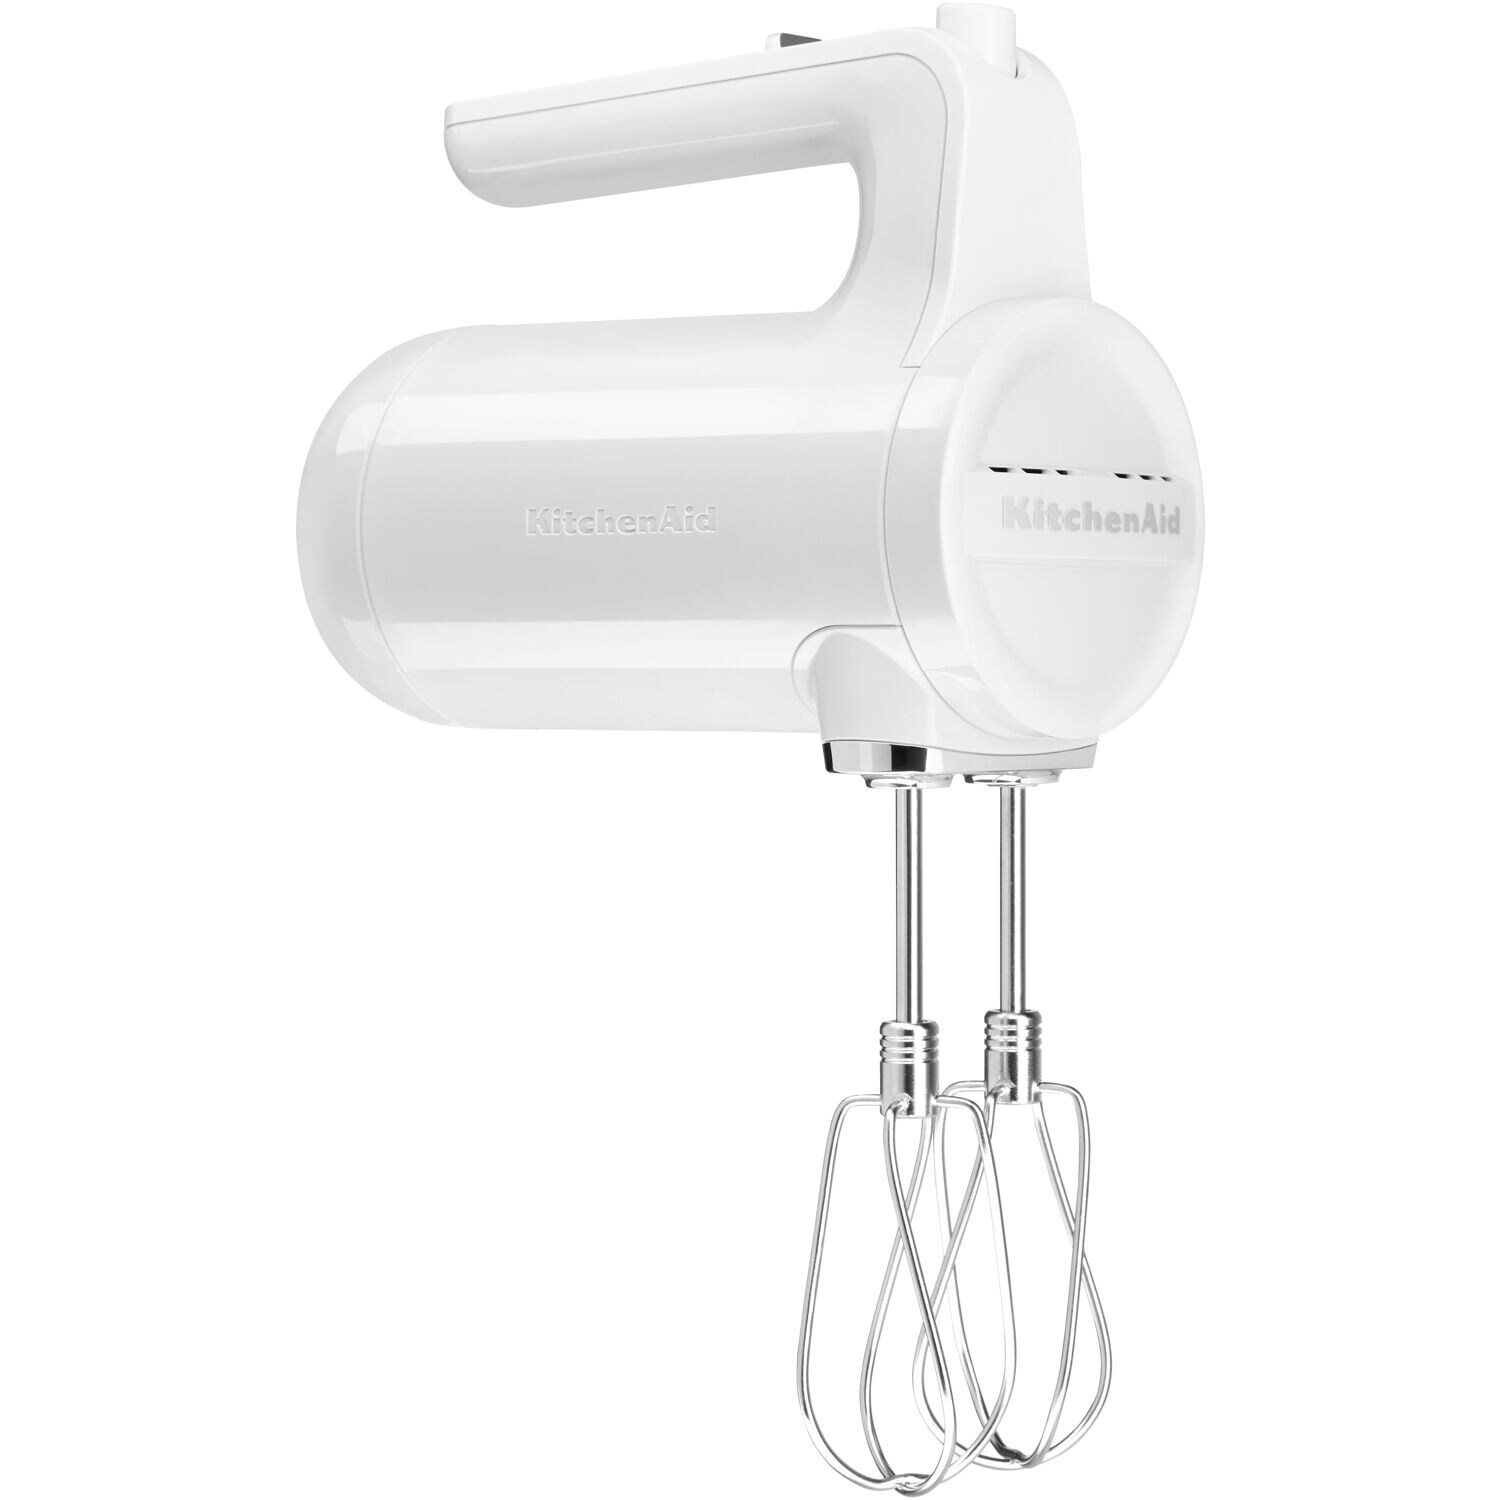 https://ak1.ostkcdn.com/images/products/is/images/direct/8554d93300209a431c727a31c736cd7a2501cdbe/KitchenAid-Cordless-7-Speed-Hand-Mixer-with-Turbo-Beaters-II-in-White.jpg